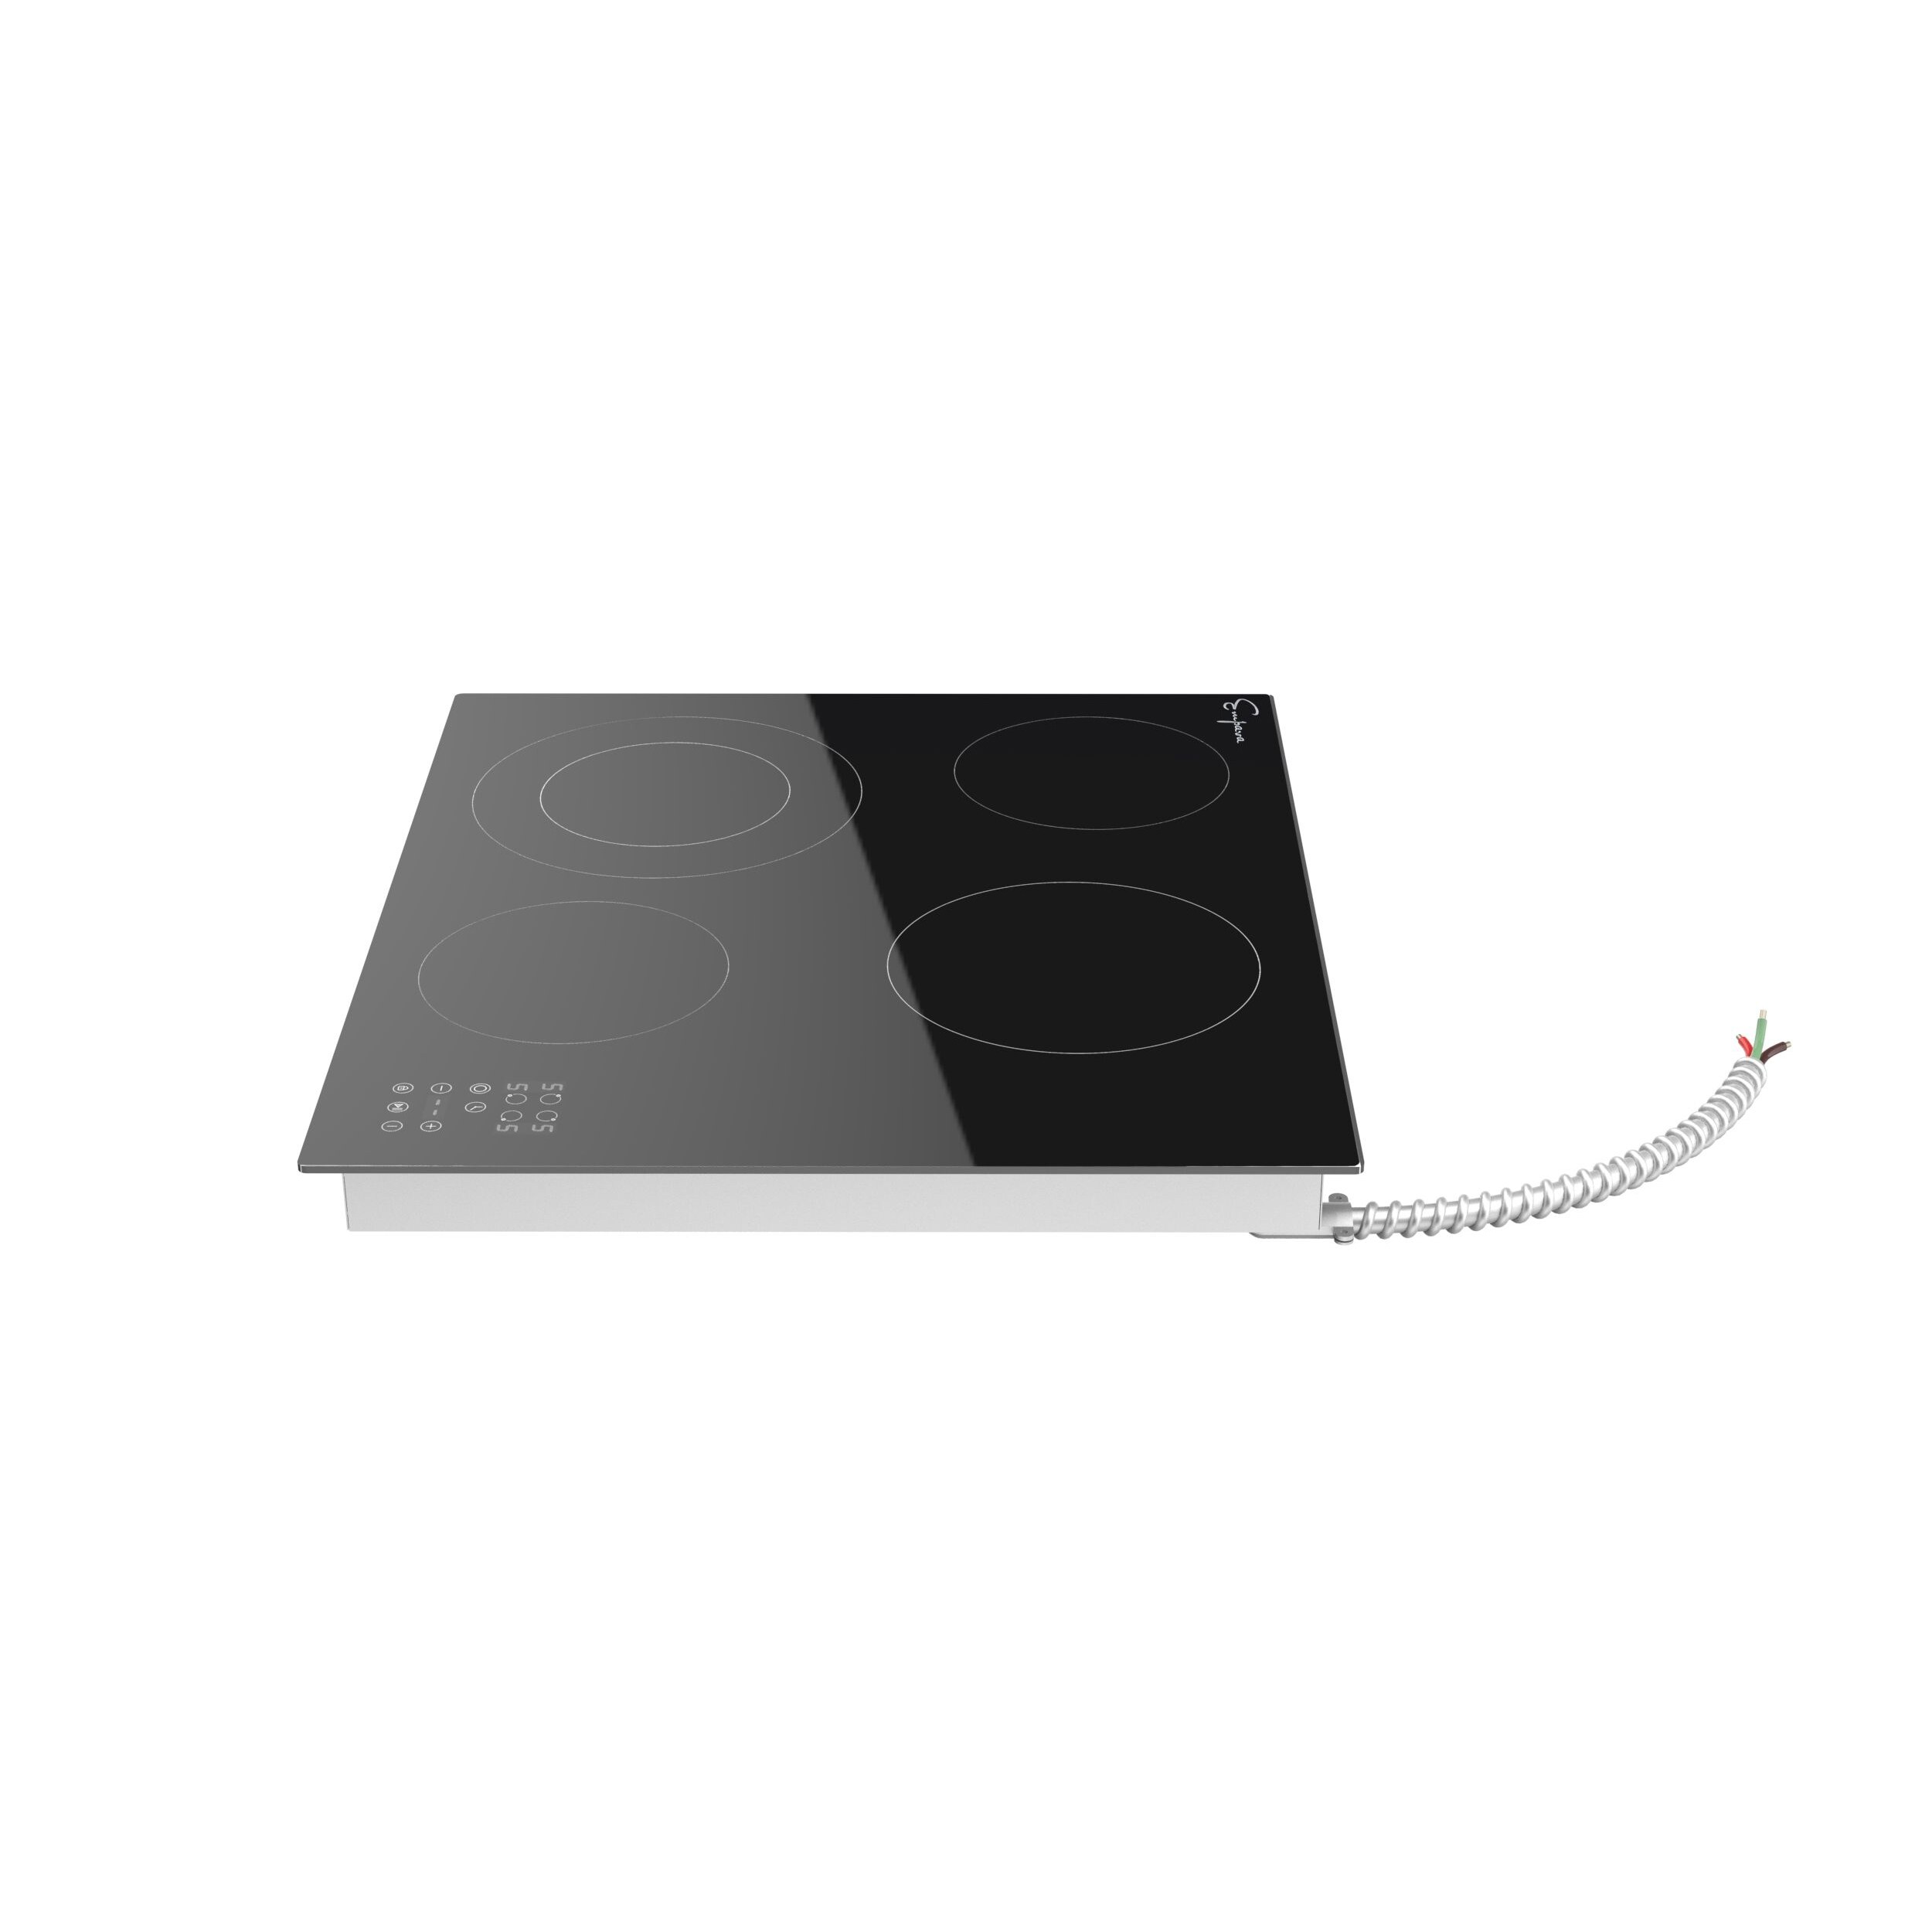 Details about   New in Box Bisque 24" Electric Cooktop Surface Unit Still High Temp Burners 